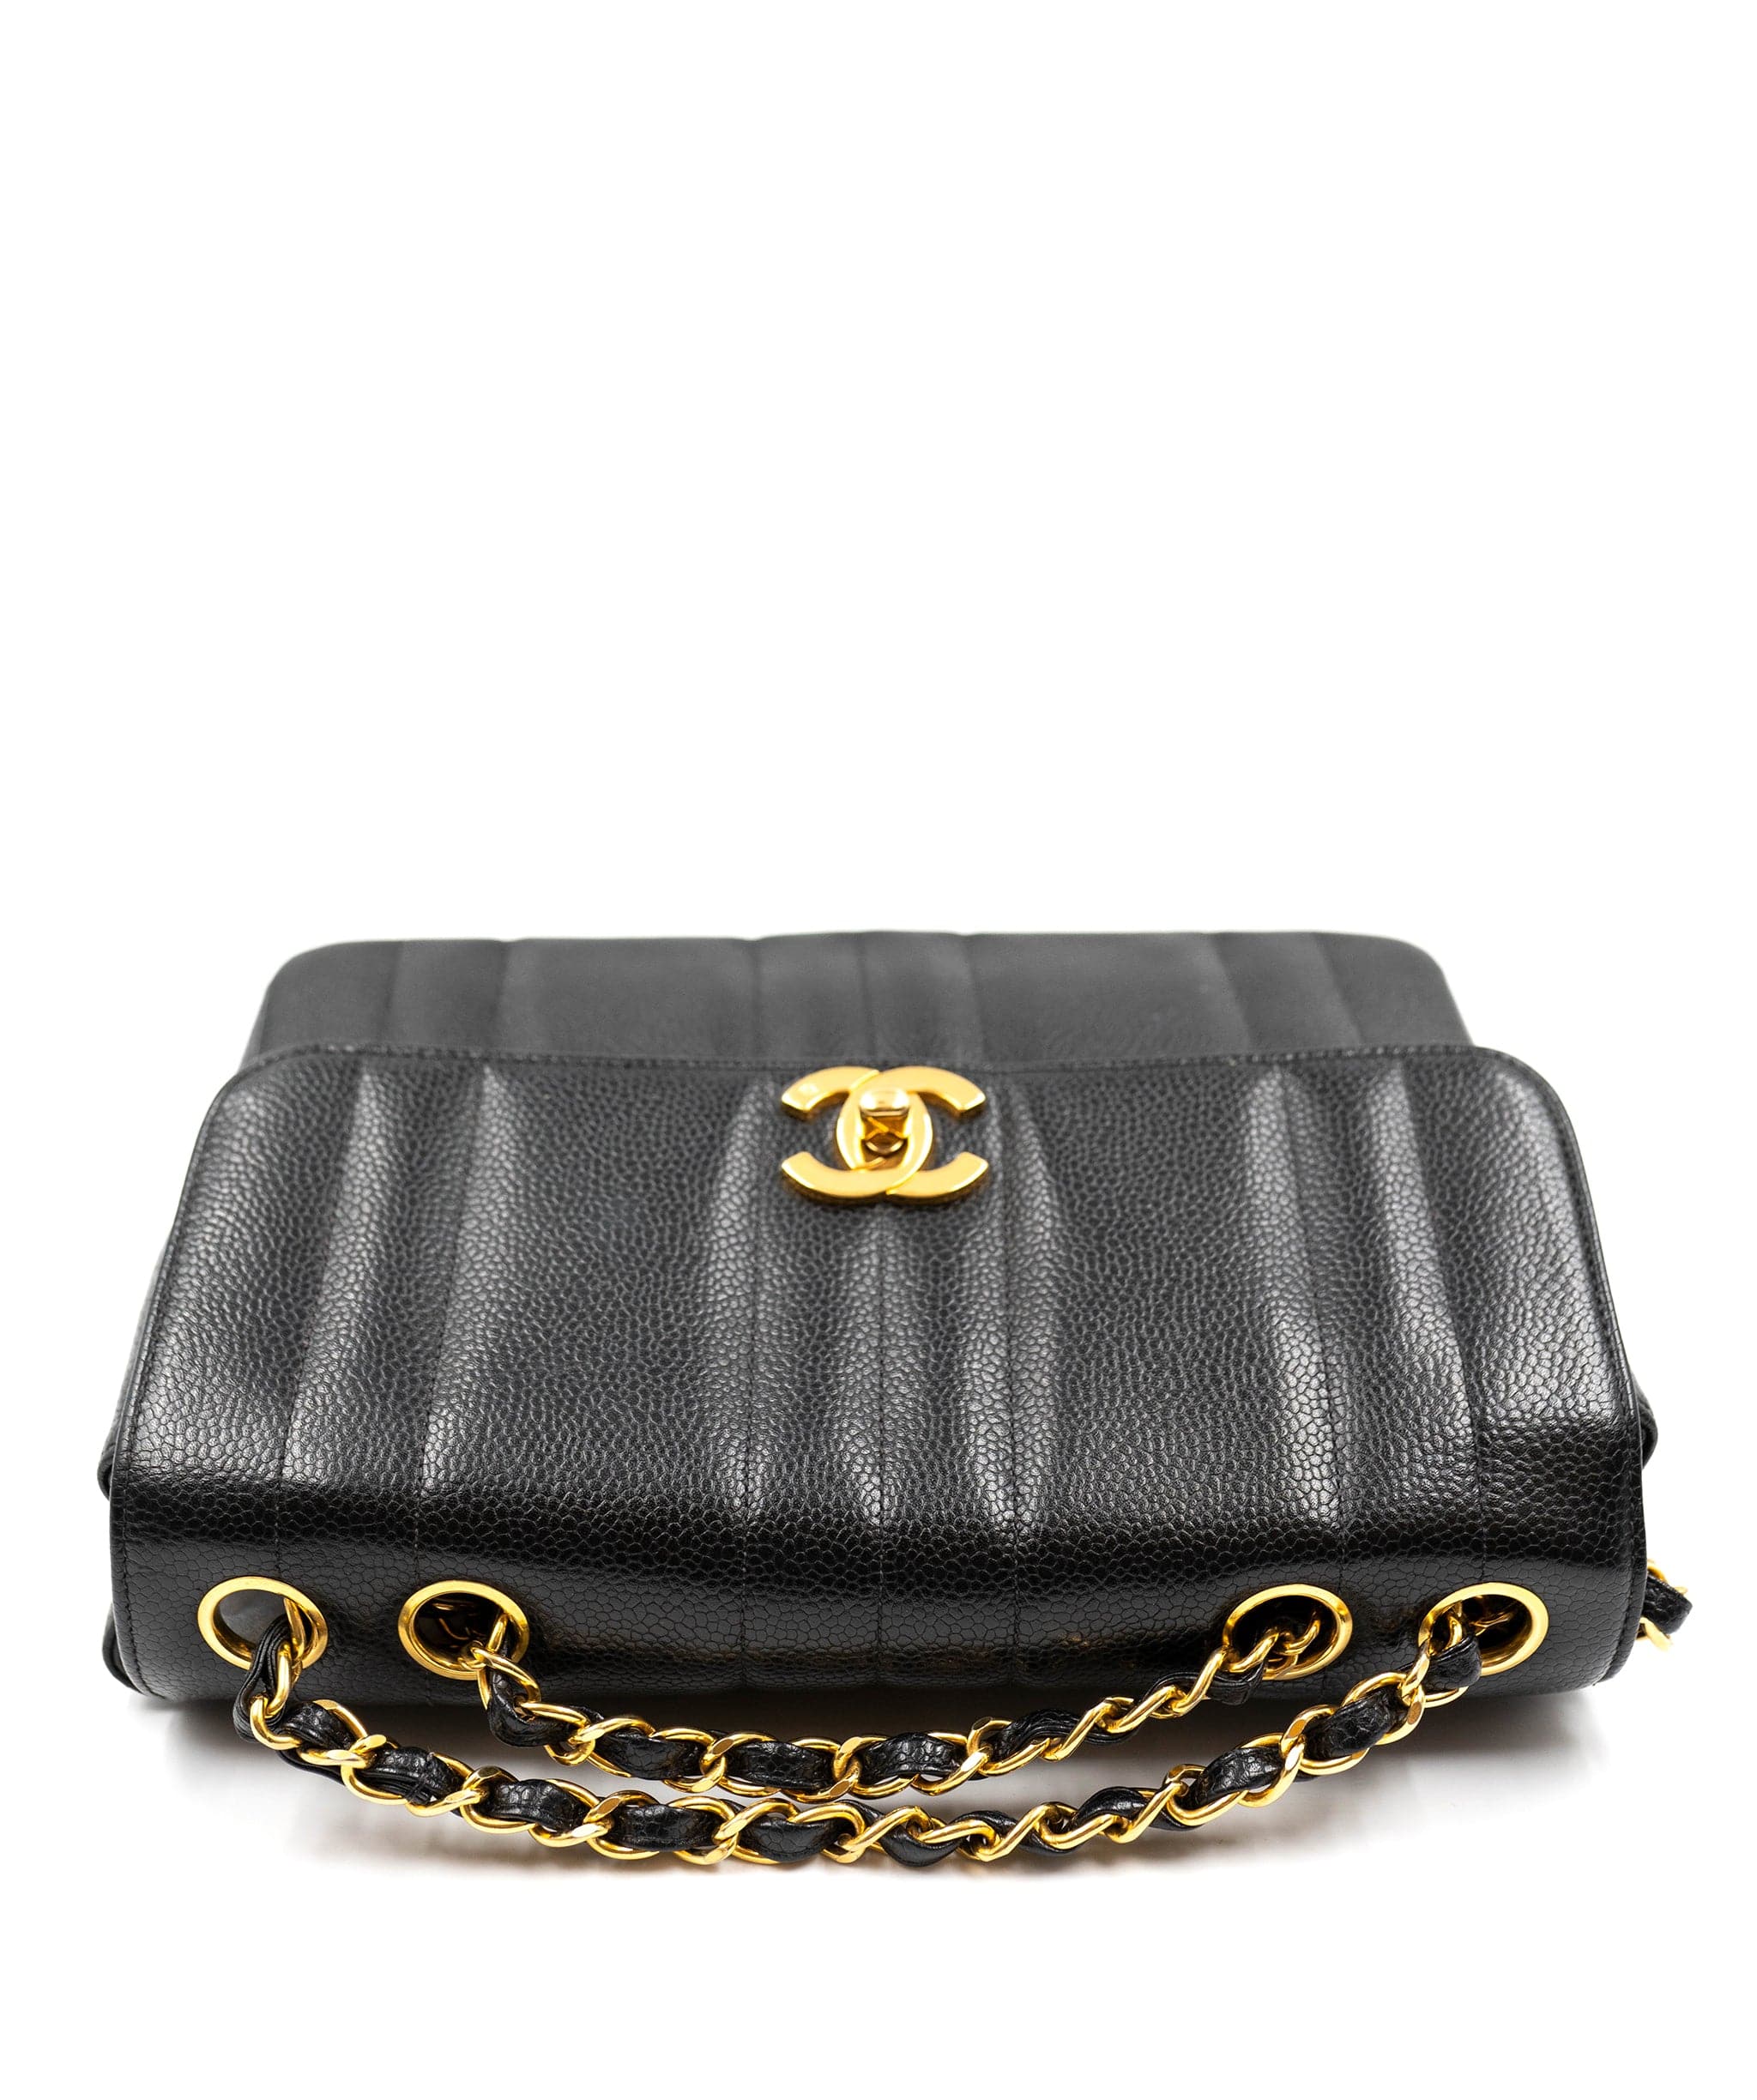 Chanel Chanel mademoiselle Square classic flap bag with Small CC logo - AWL3370